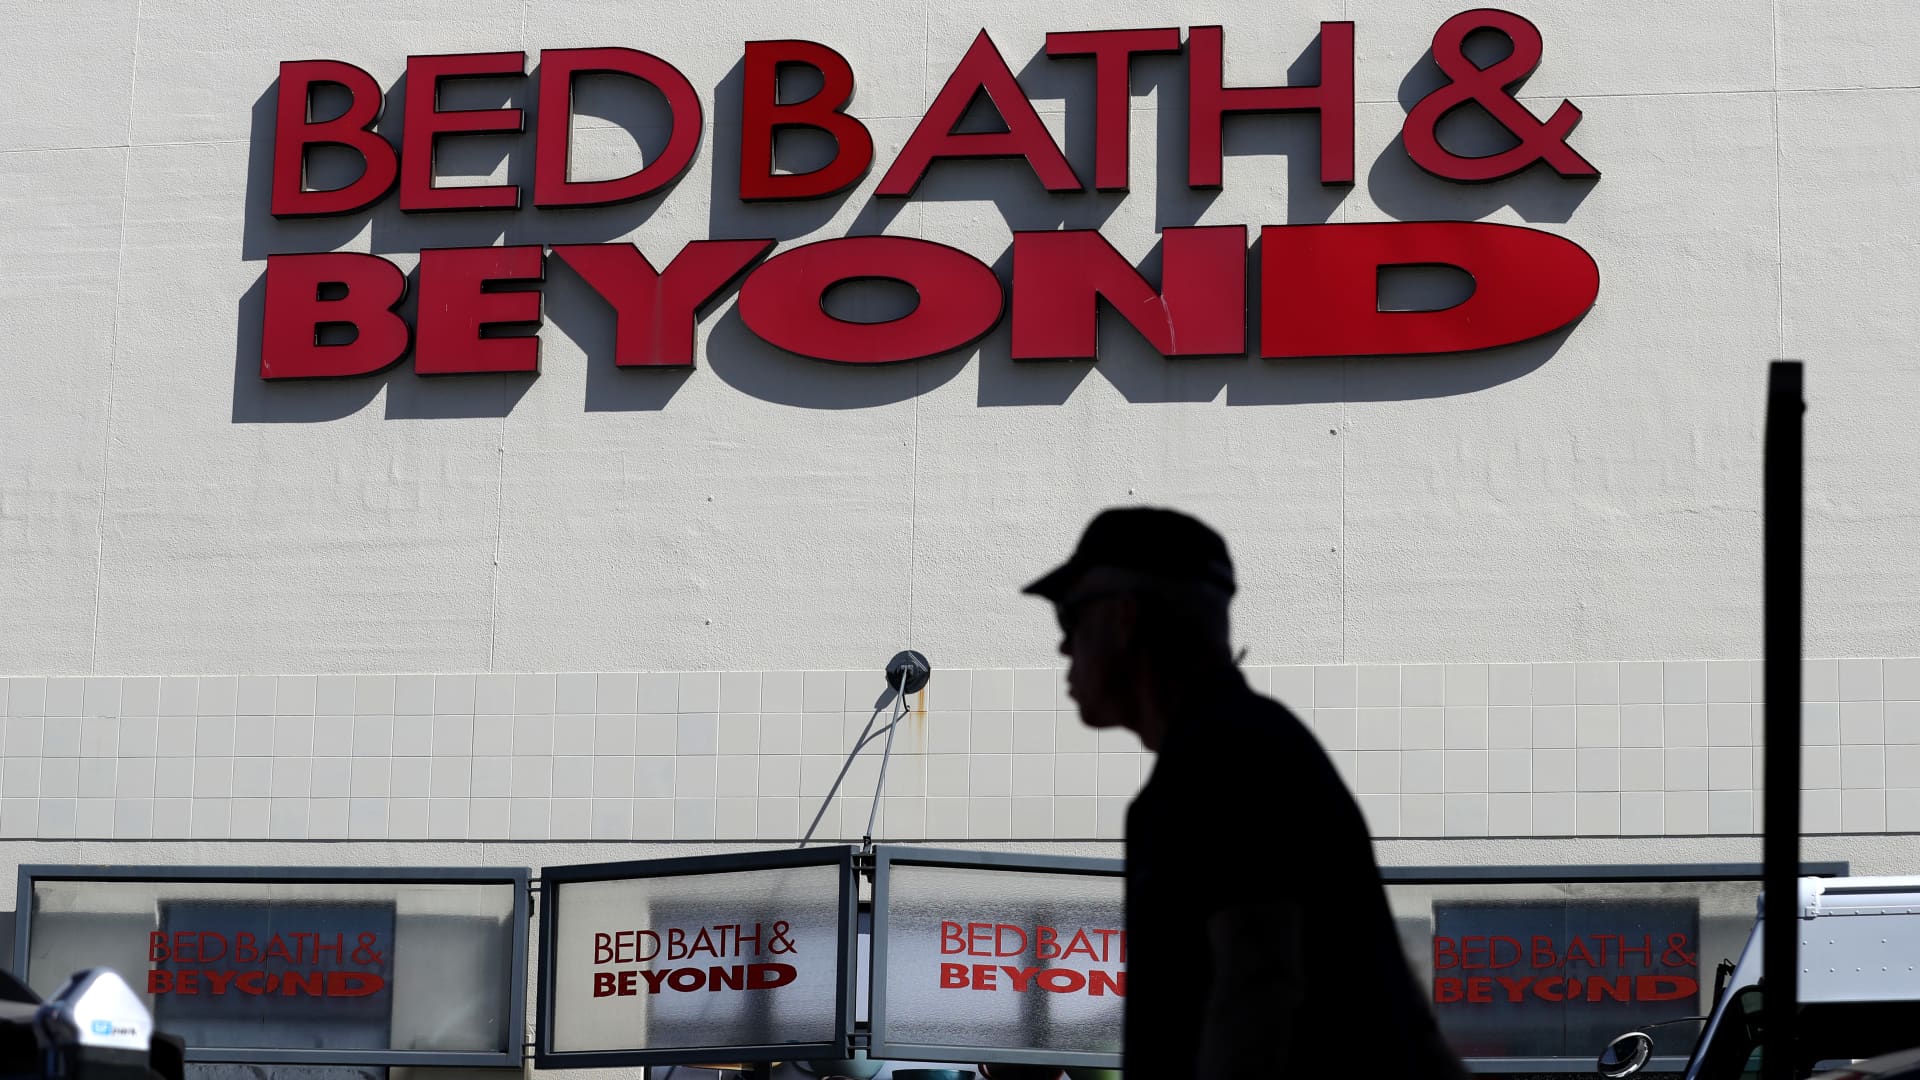 Bed Bath & Beyond (BBBY) Q1 2022 earnings